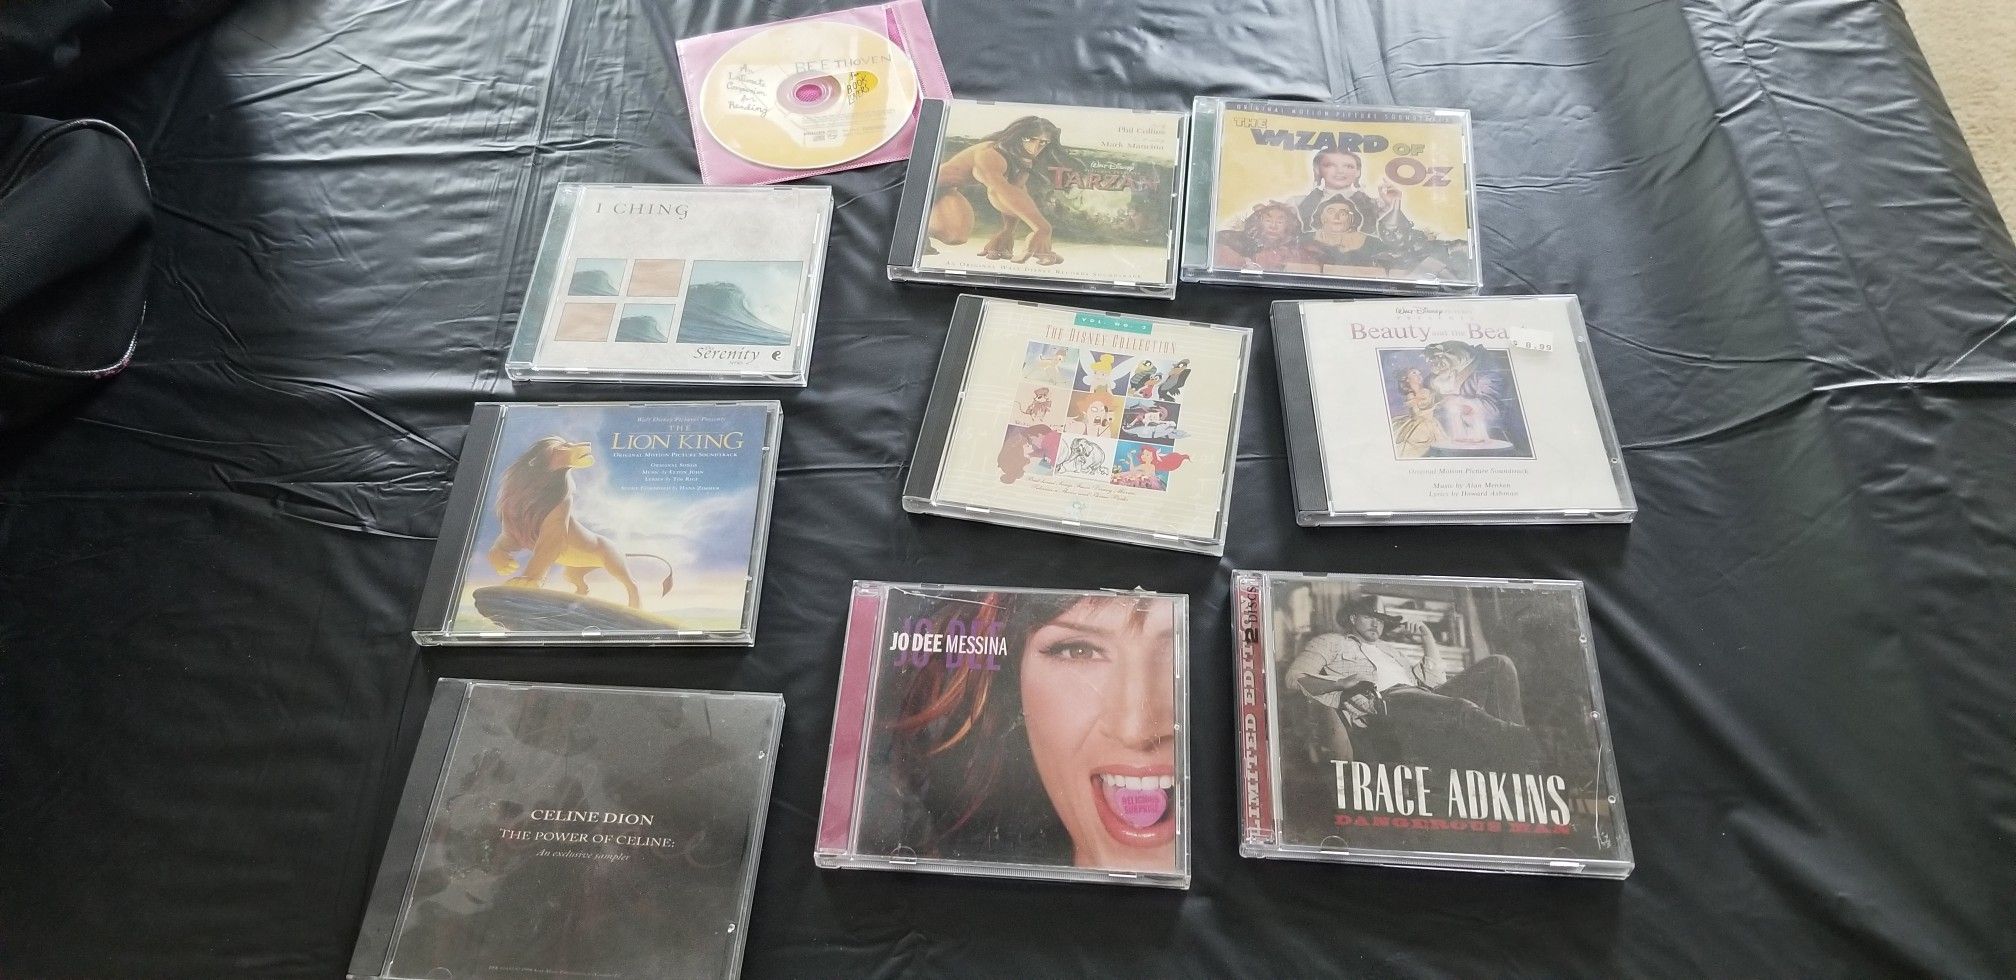 Disney CDs and others included